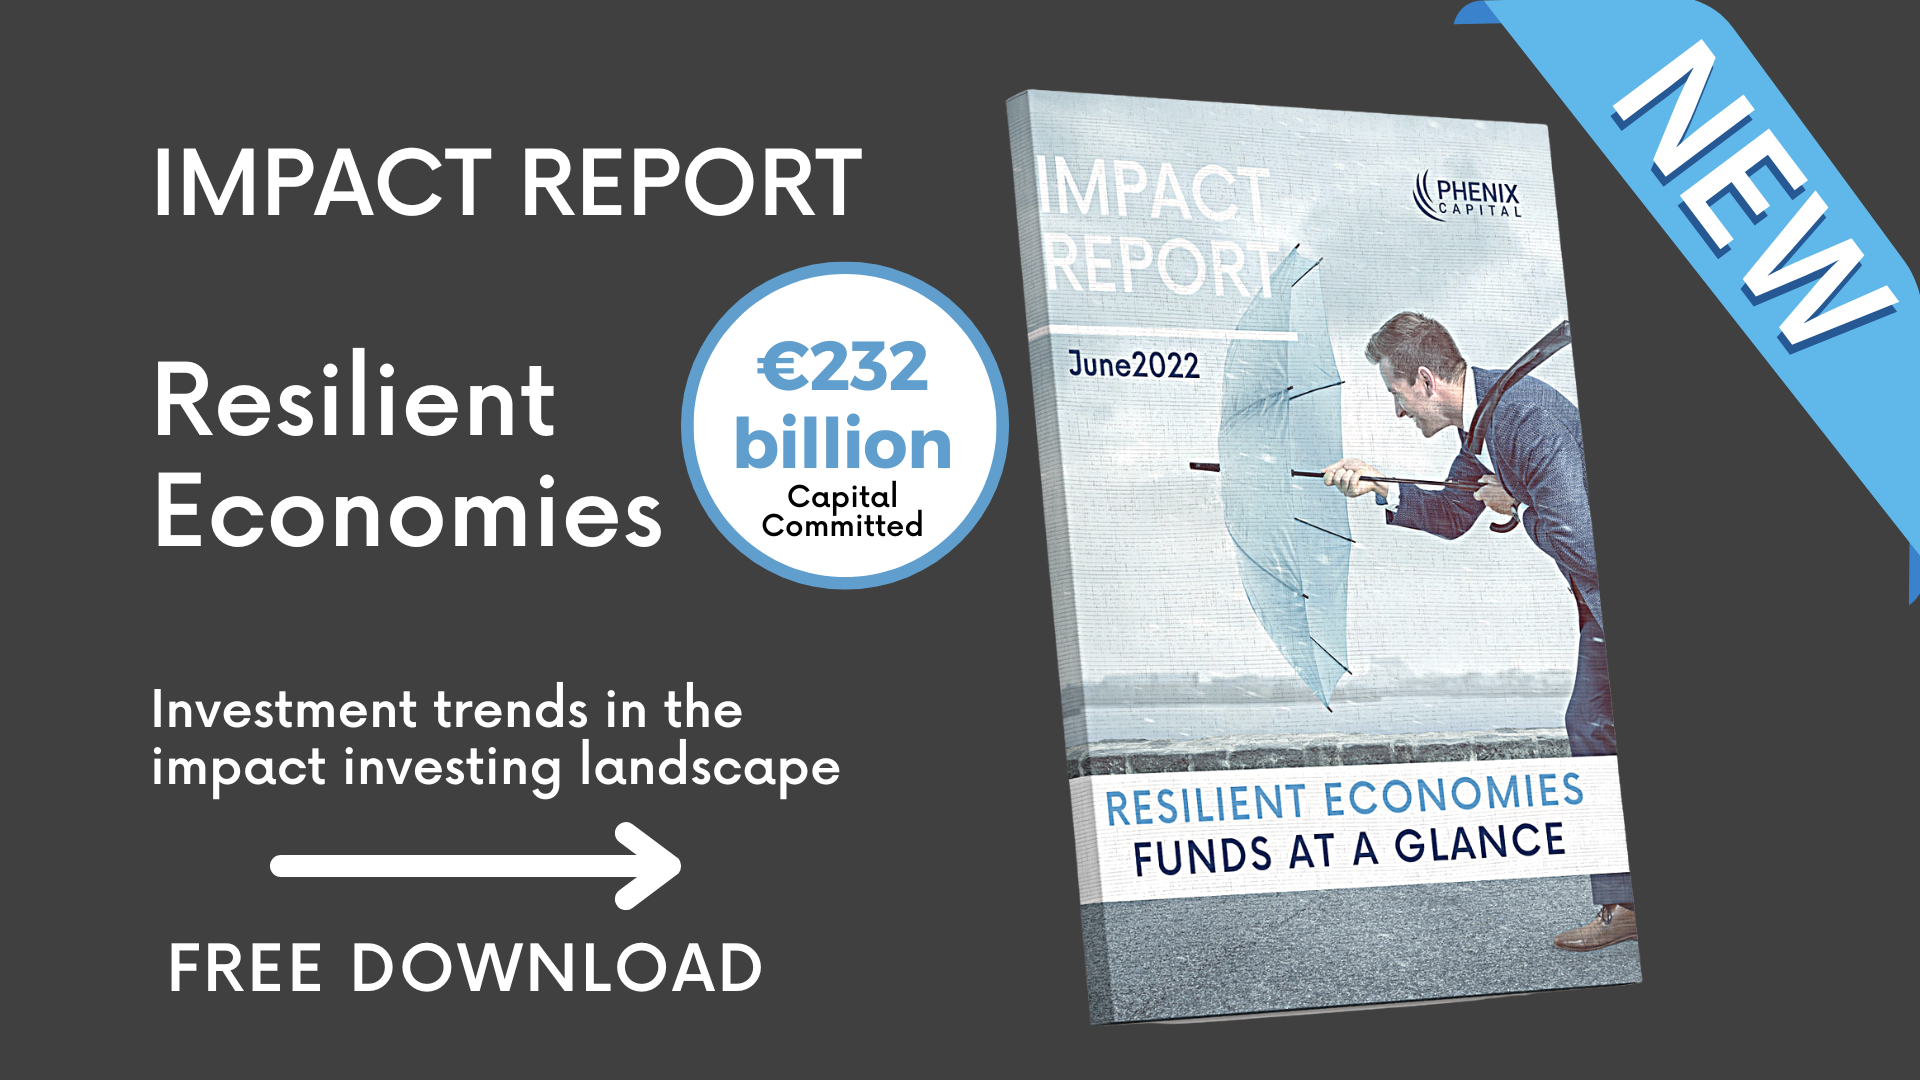 PRESS RELEASE: €232 billion has already been committed to Resilient Economies